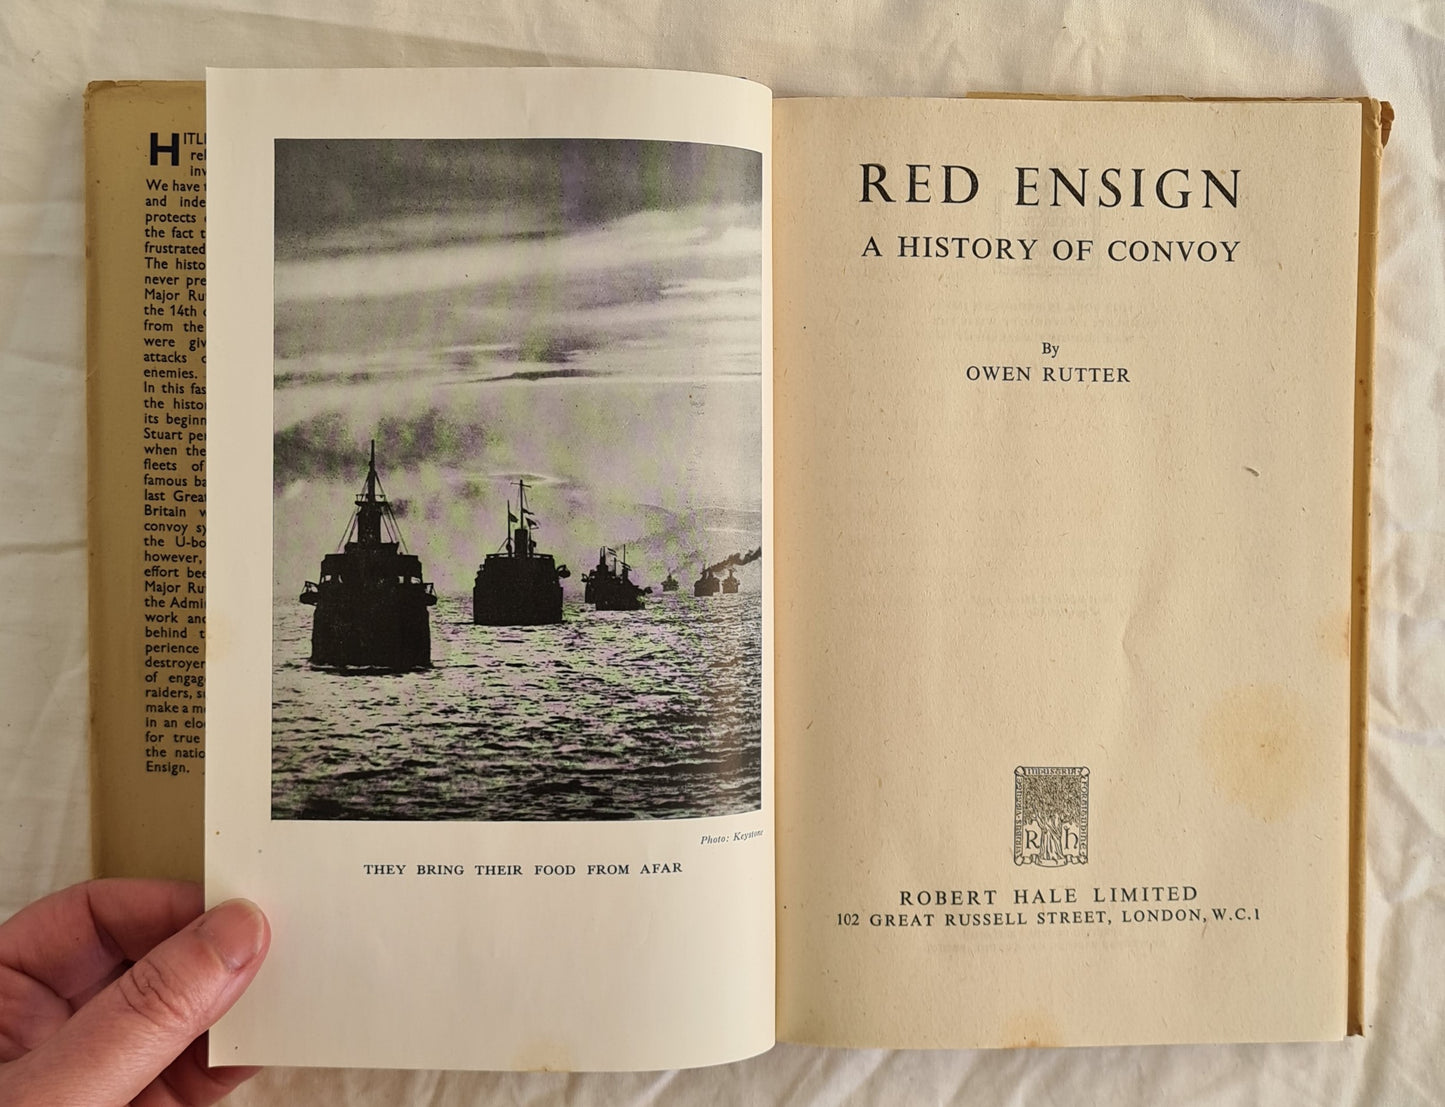 Red Ensign by Owen Rutter